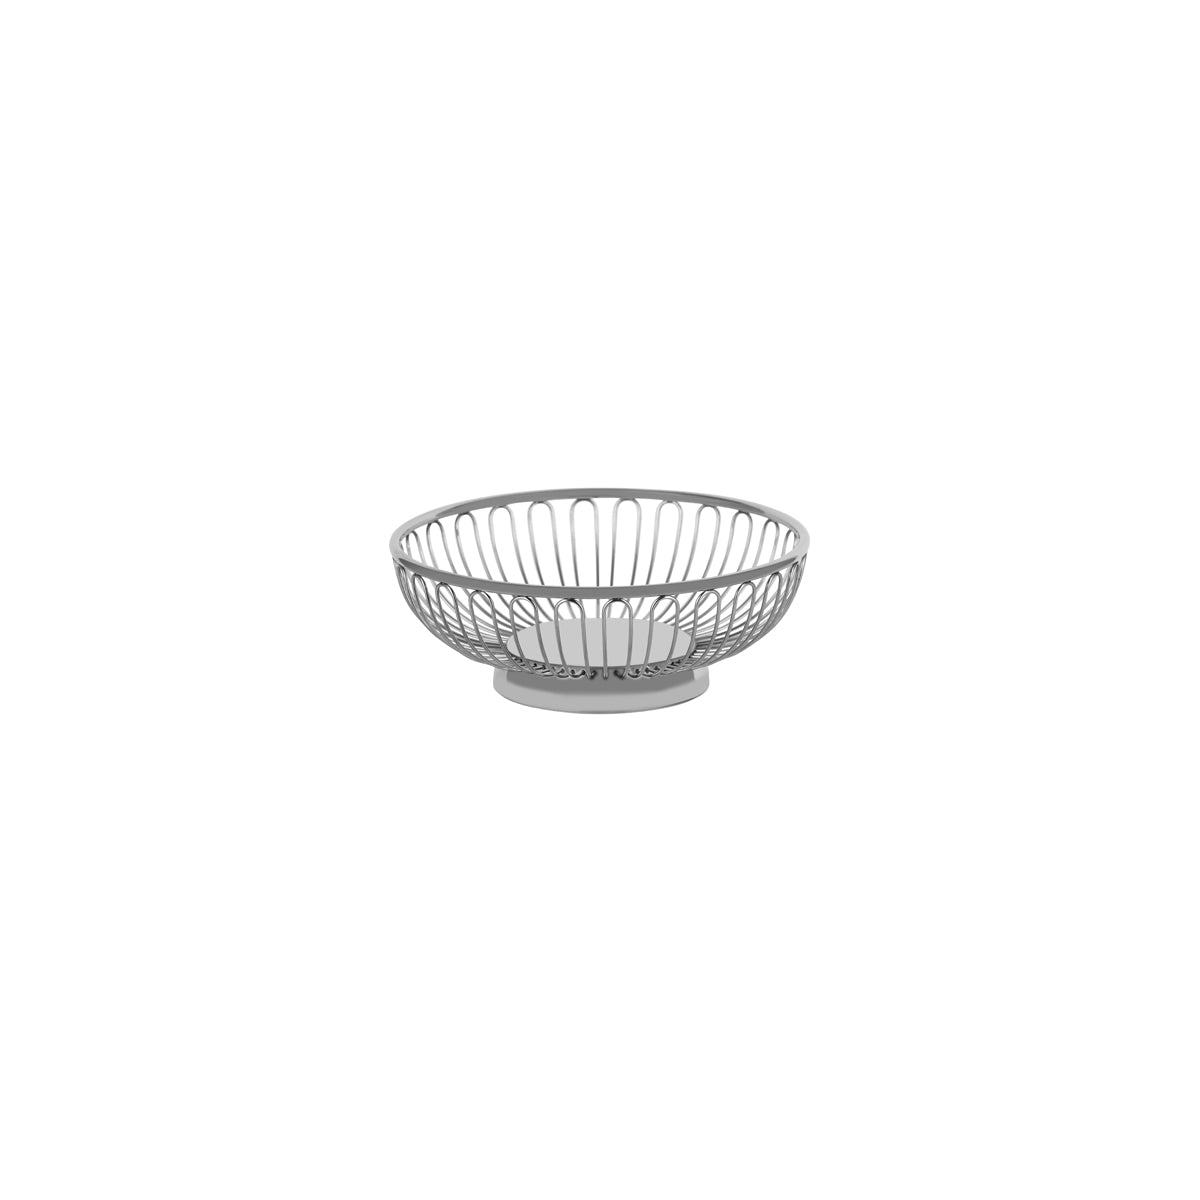 70355 Chef Inox Round Wire Basket Solid Base Stainless Steel 172x60mm Tomkin Australia Hospitality Supplies